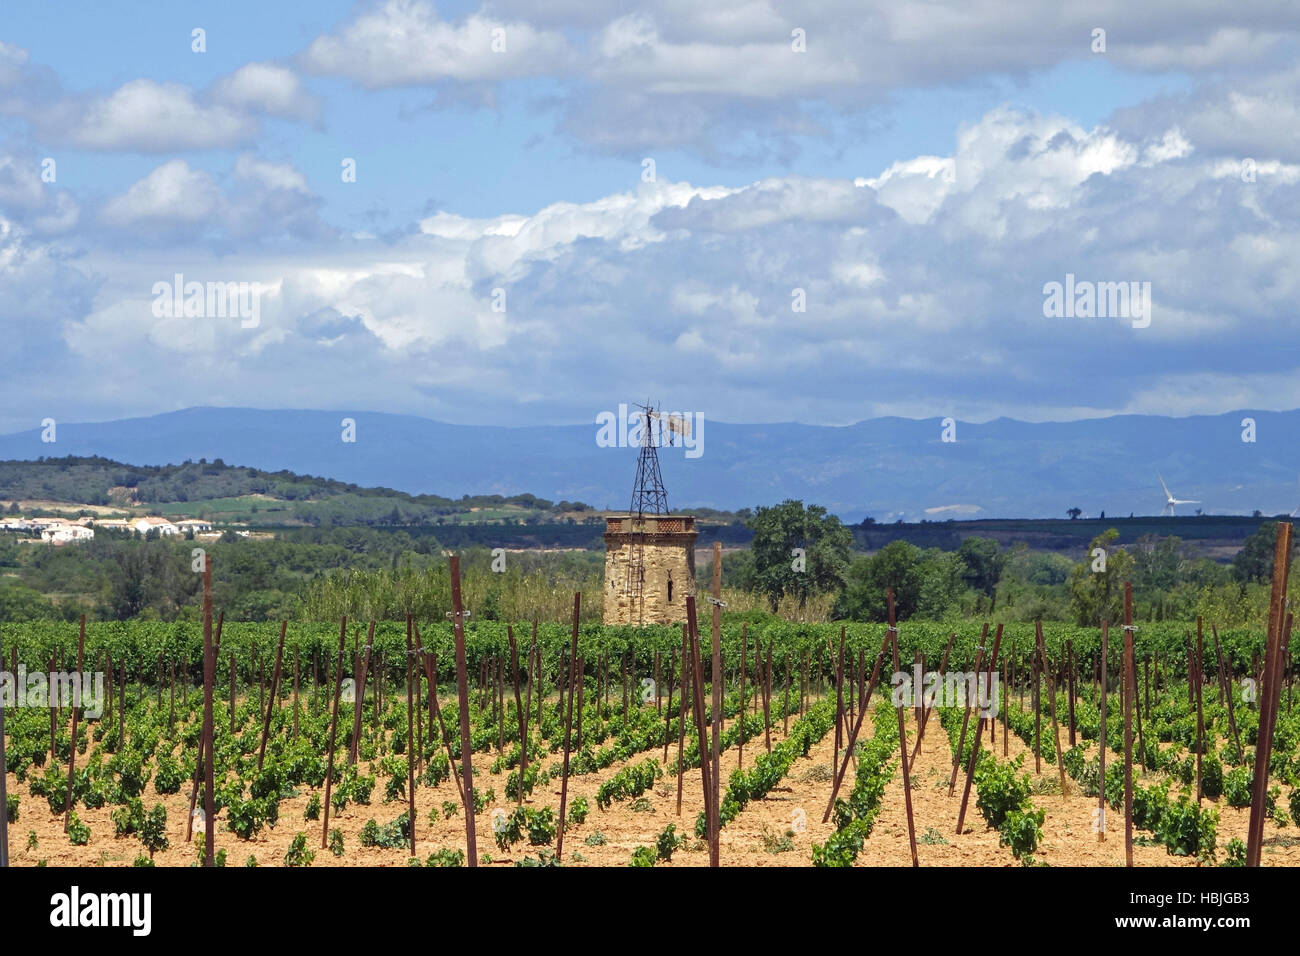 Wine-growing region in southern France Stock Photo